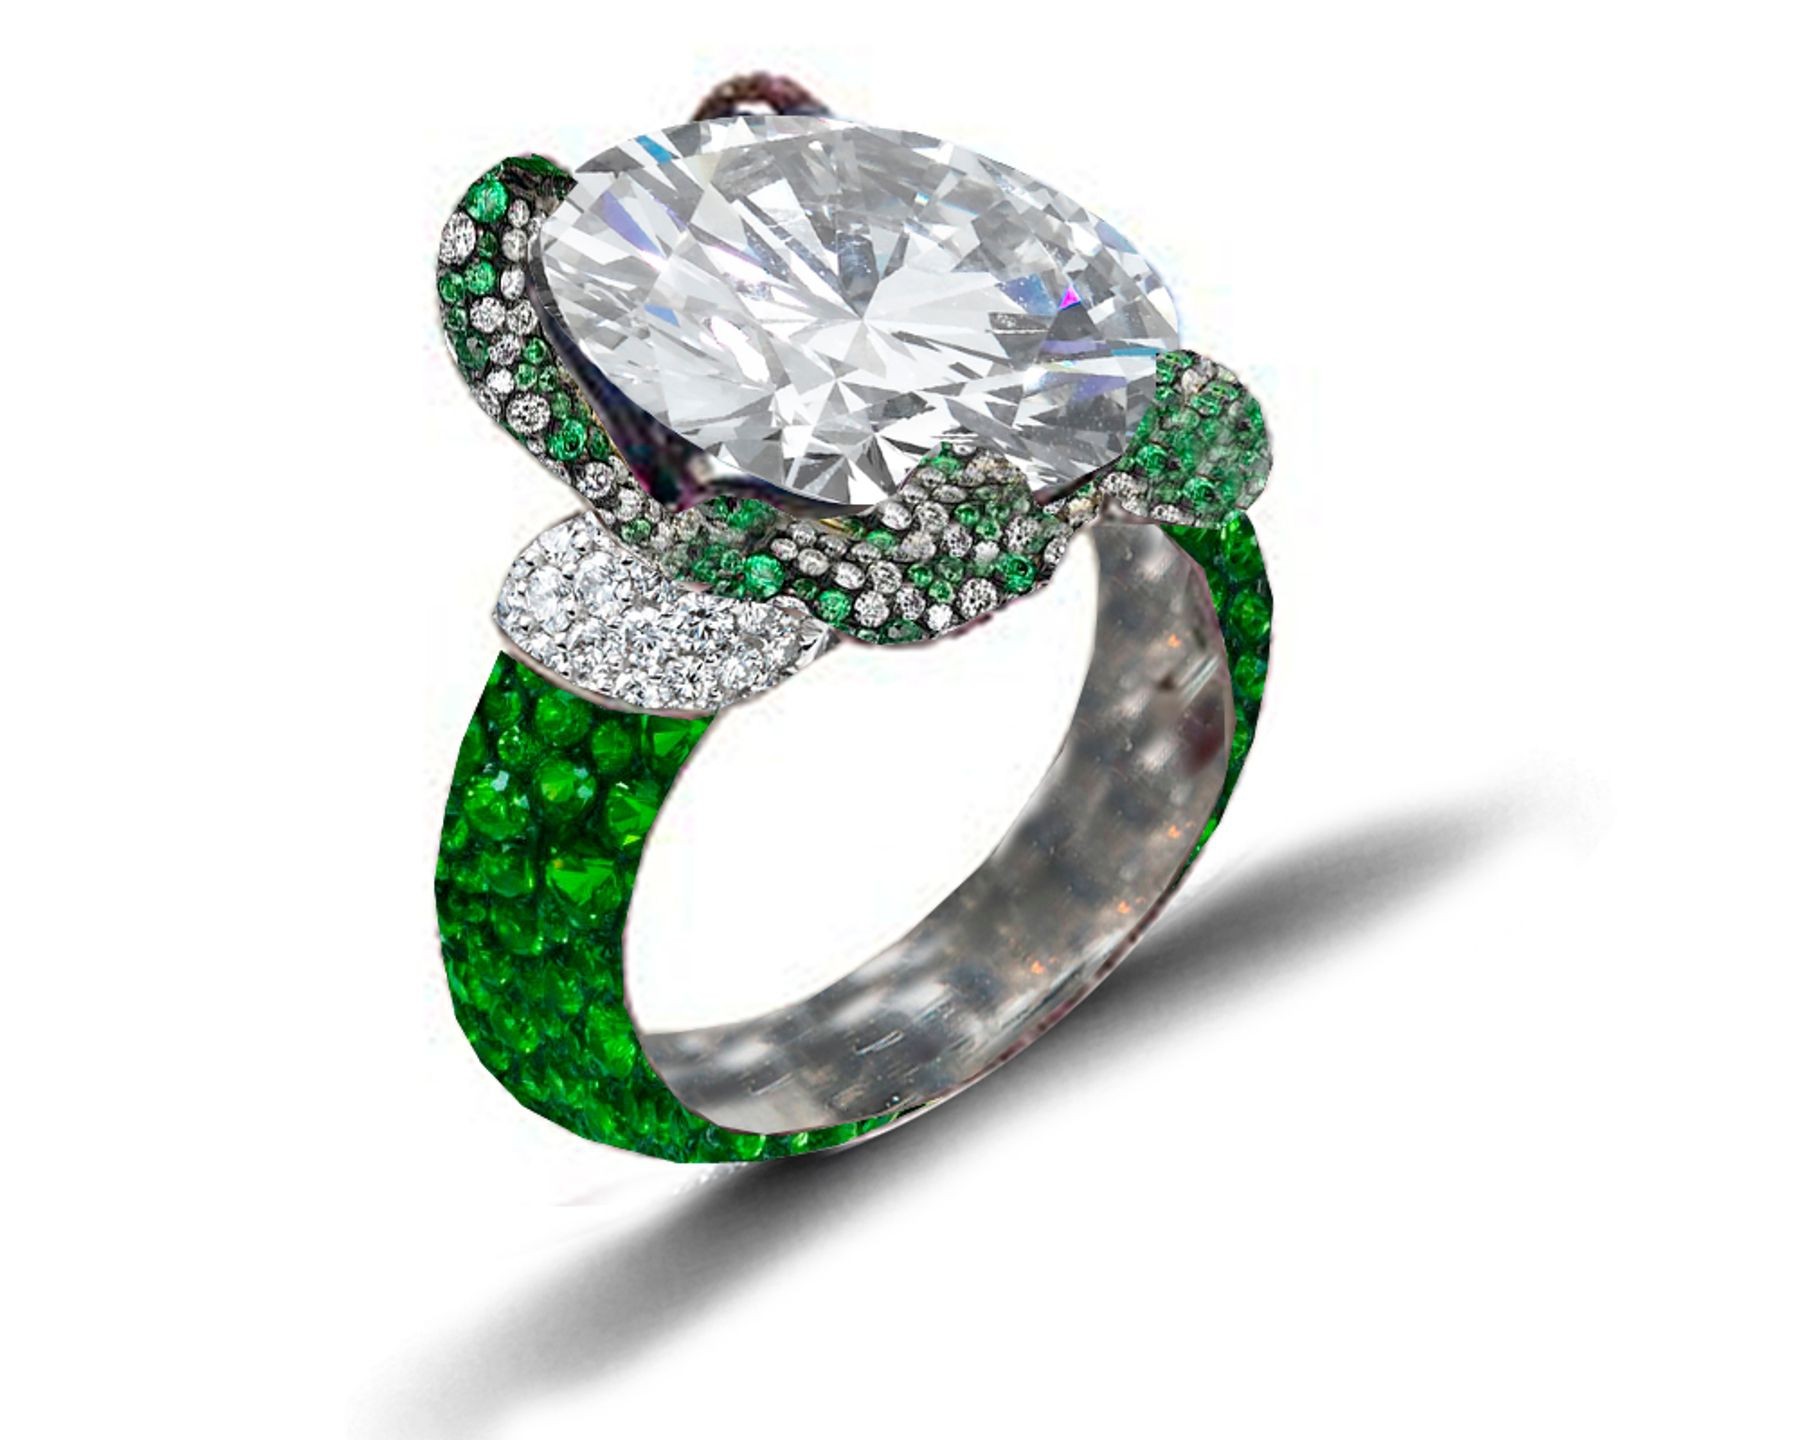 Ring with Round Diamond & Pave Set Emeralds & White Diamonds in Gold or Platinum